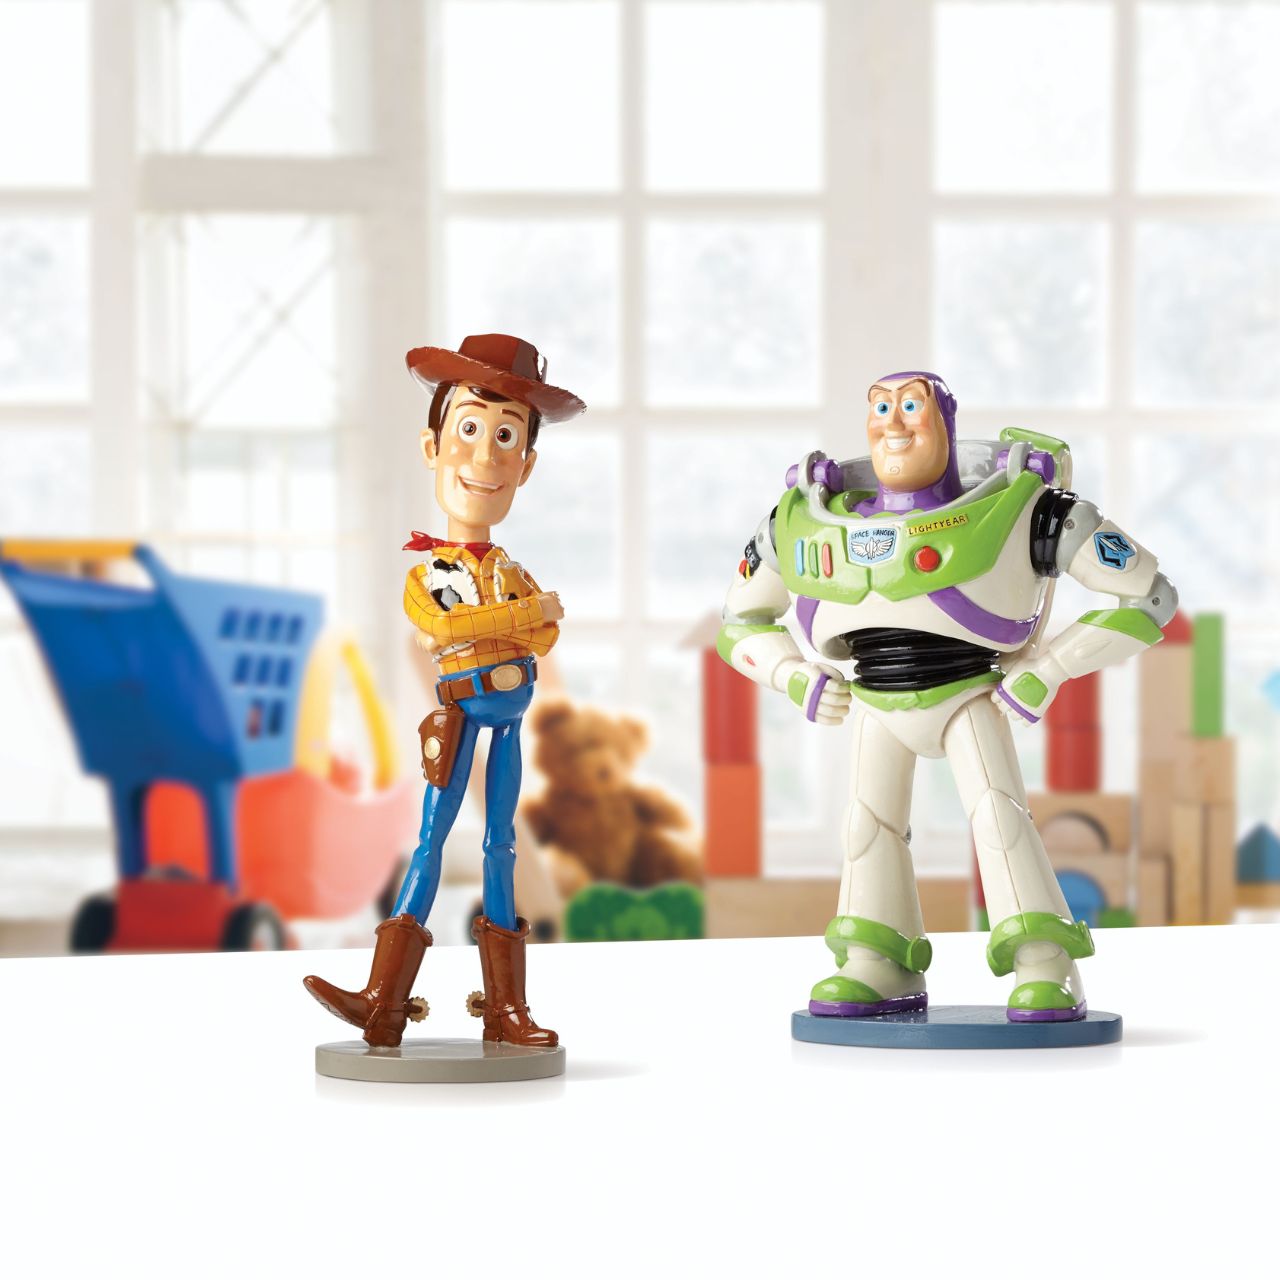 Disney Toy Story Woody Figurine  Howdy Partner! There's a new Sheriff in town and he found his way into the Disney Showcase Collection in this faithful recreation of the unforgettable stars of Disney/Pixar's Toy Story feature animation films. Shiny finish gives the Woody that CGI look.